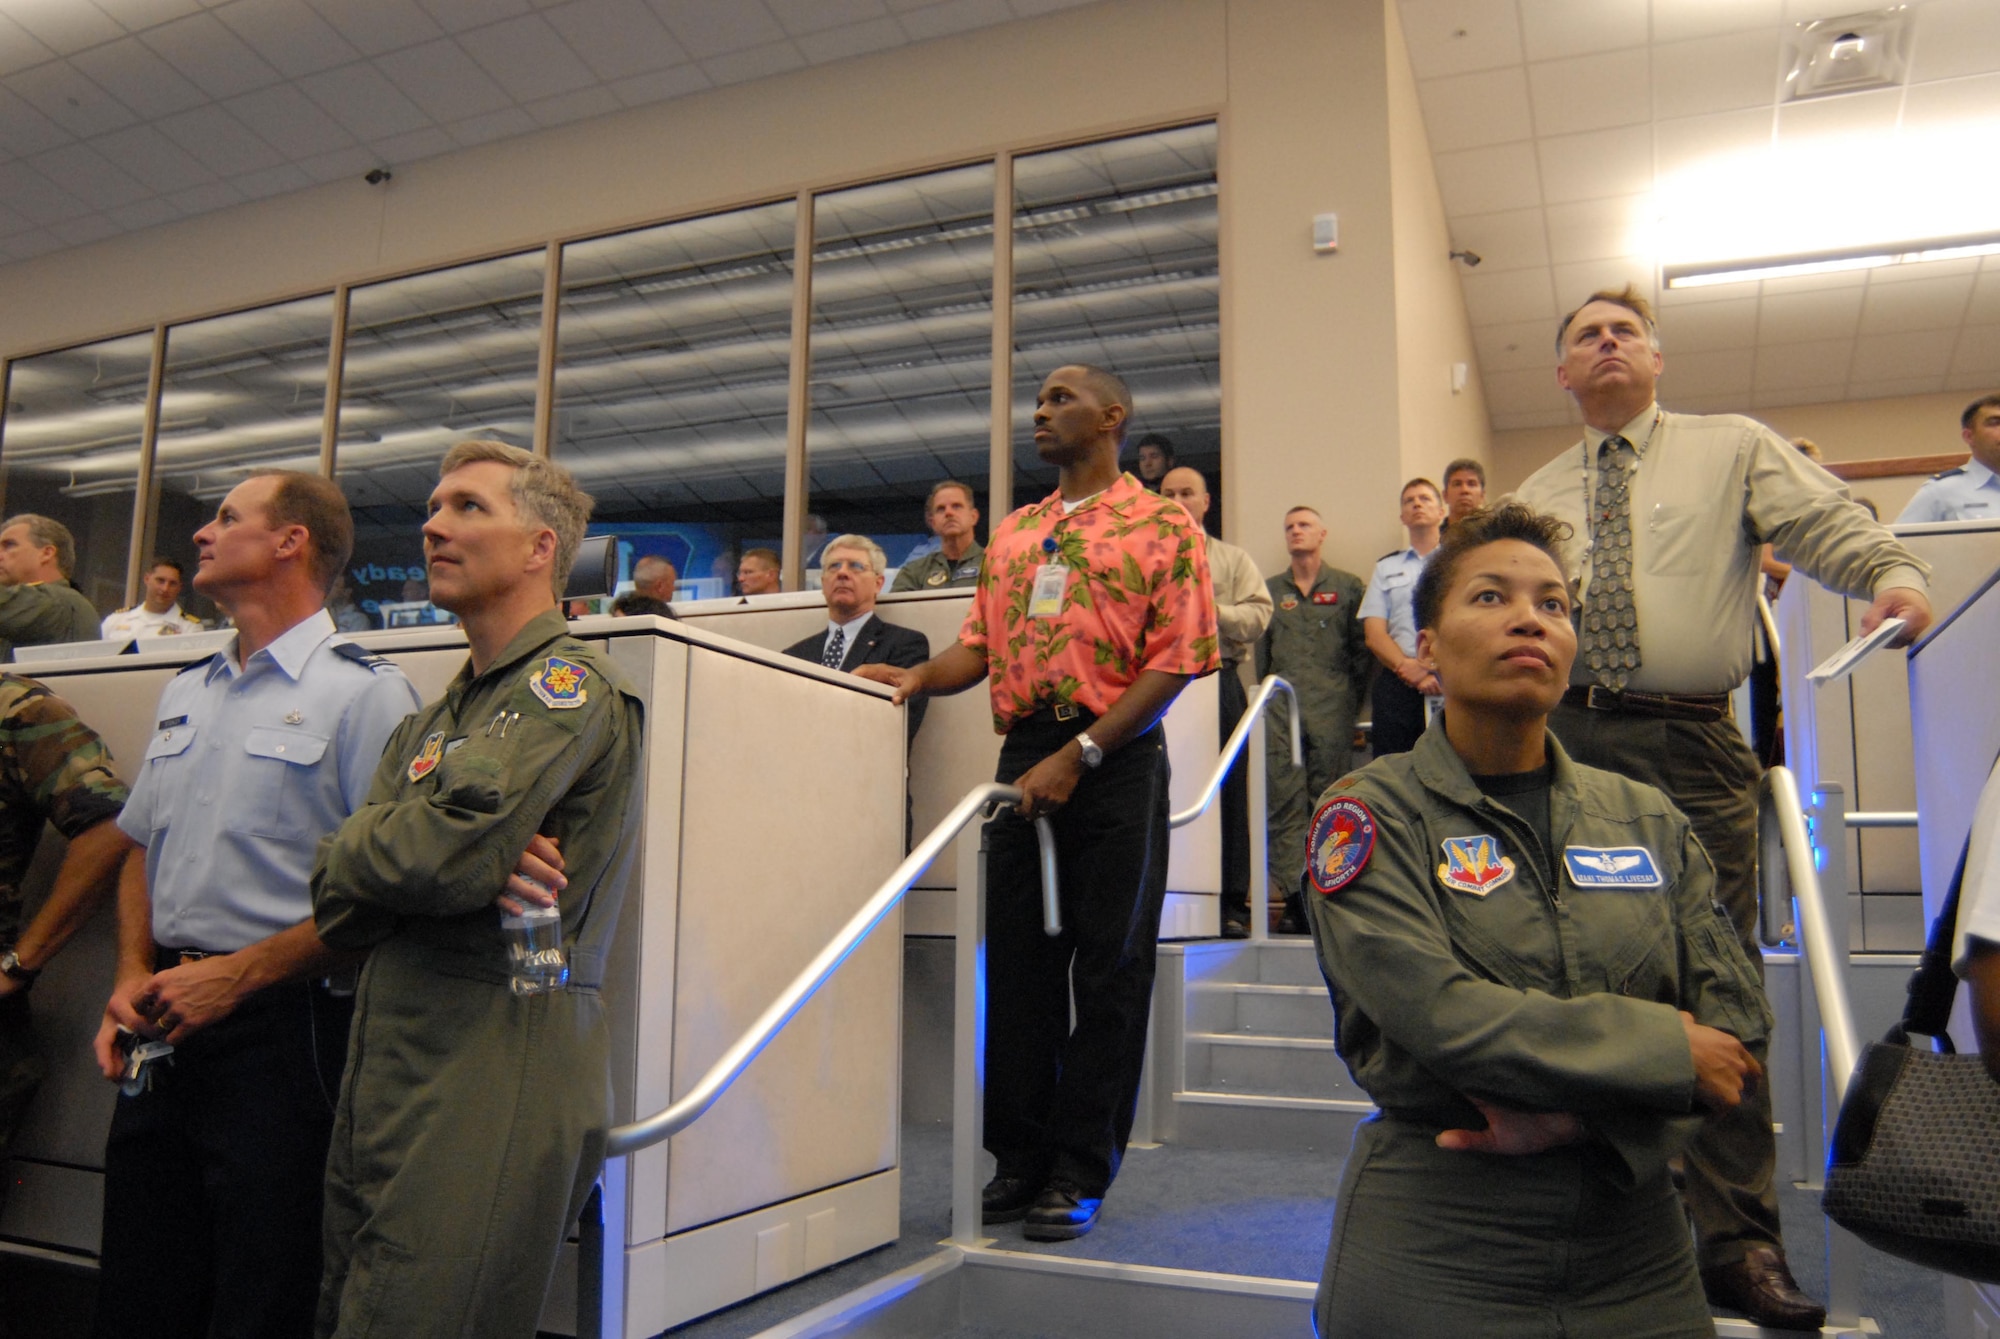 Guests look on as video presentation is displayed on new $3.5 million data wall at dedication of new AFNORTH air and space operations center.